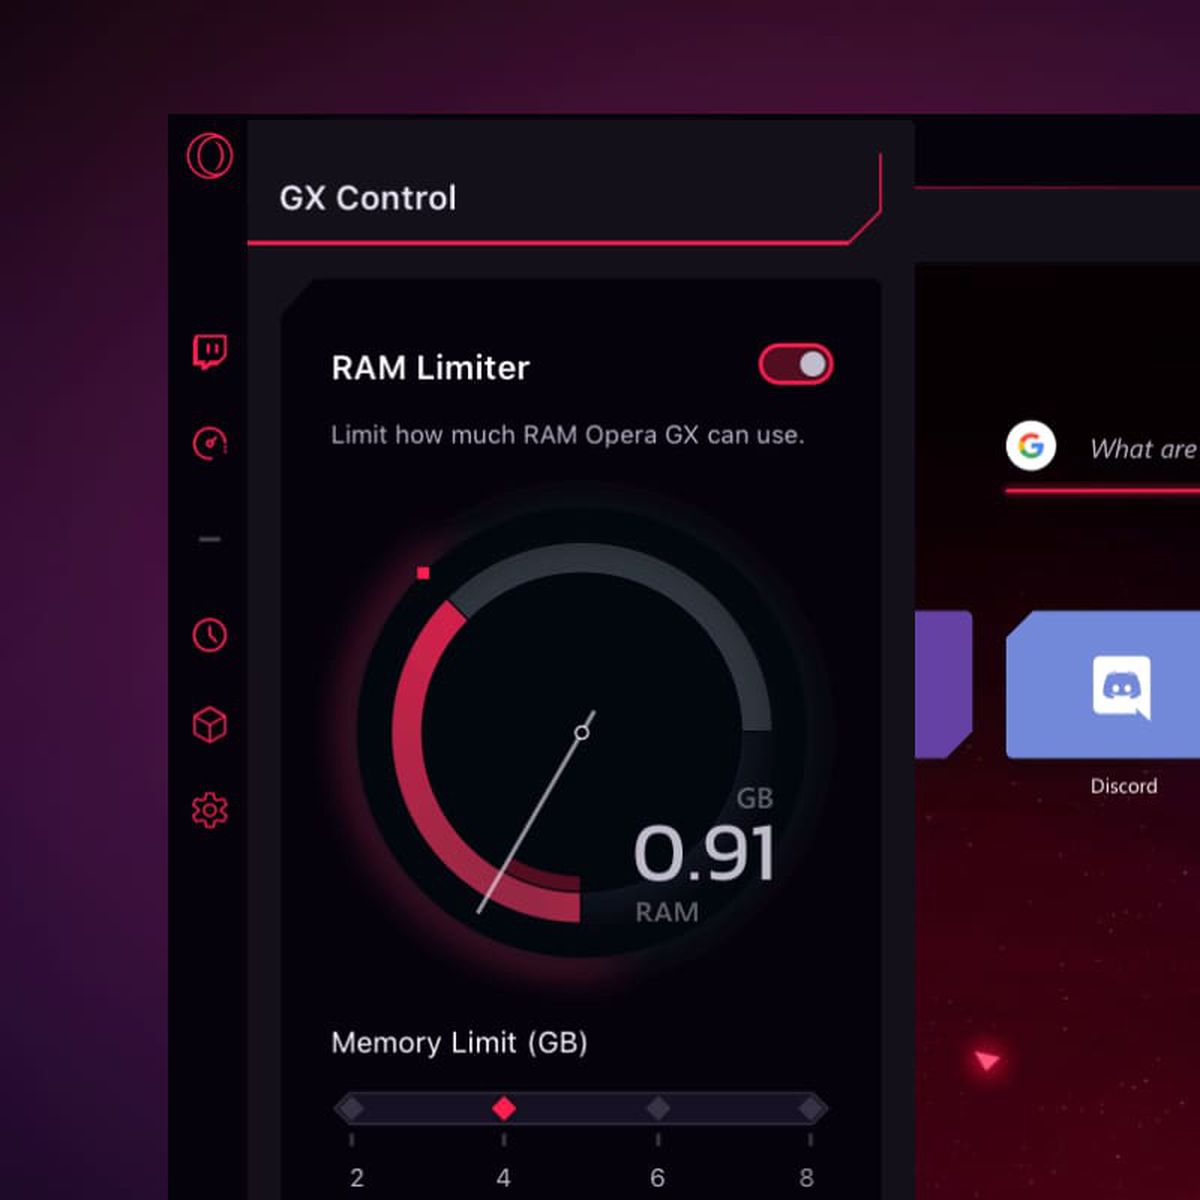 Sign up to get early access to Opera GX, Opera's first gaming